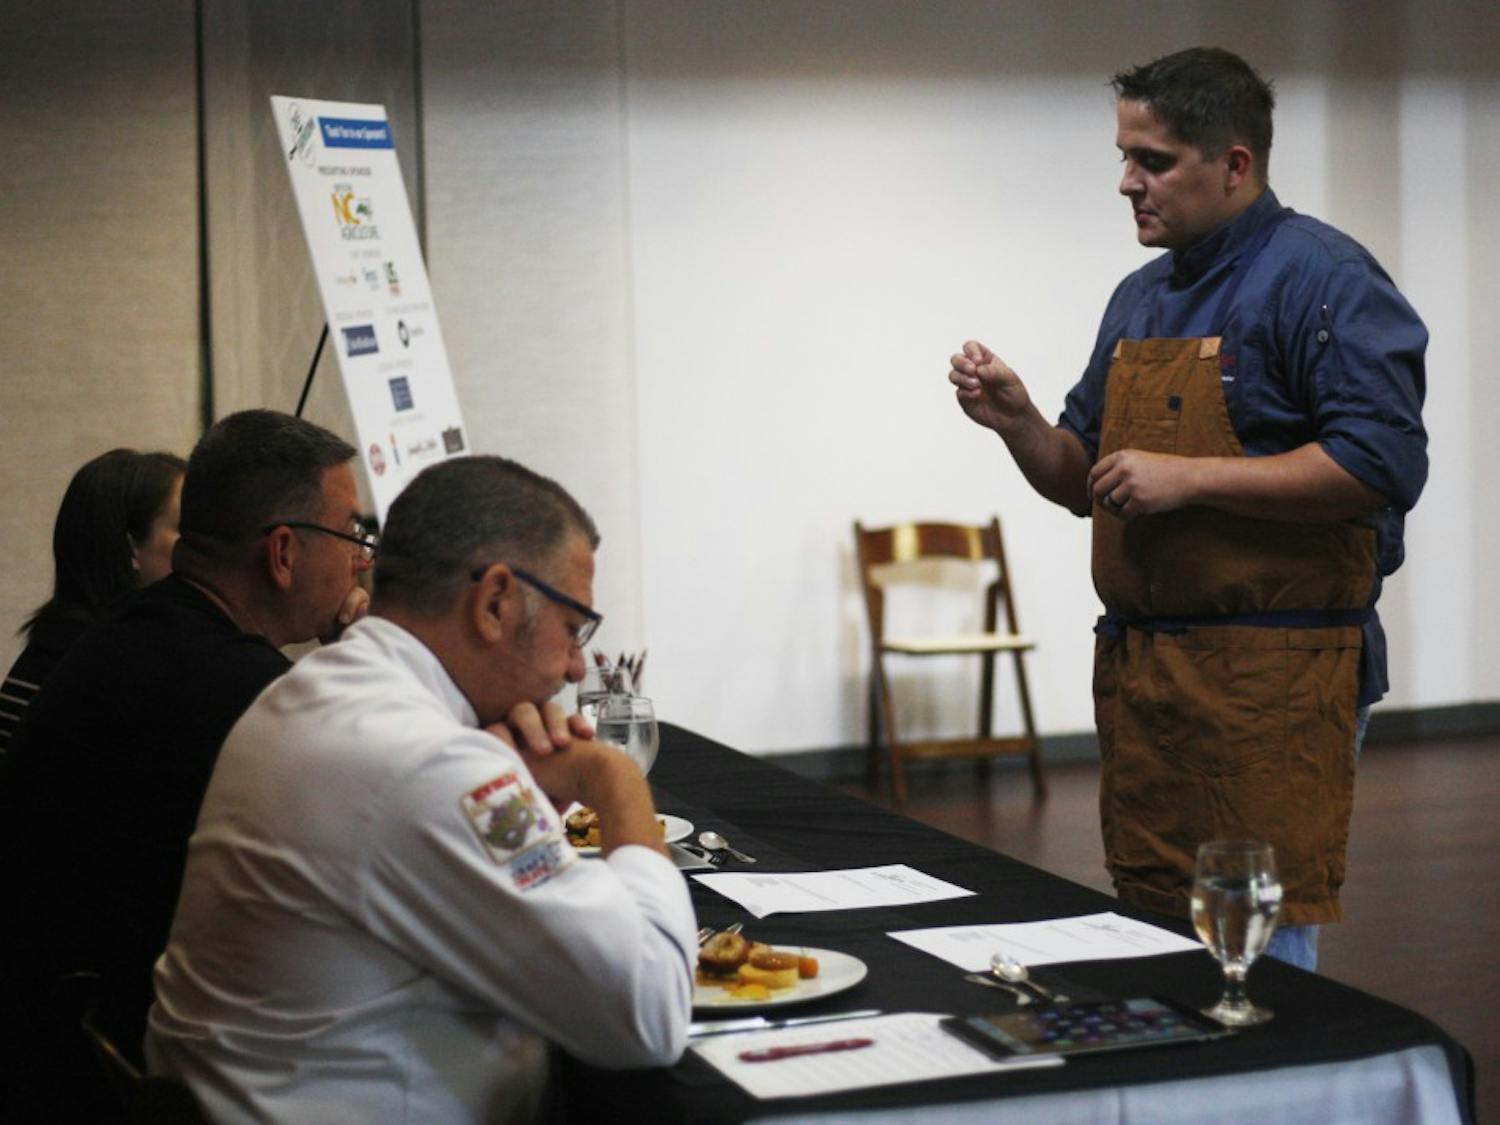 The 2019 NCRLA Chef Showdown was held in Chapel Hill on Monday July 22, 2019. Pictures show Thomas Card, executive chef at 21C Counting House, and Nicole Lourie, pastry chef at 21C Counting House, preparing their dishes for the judges of the competition.